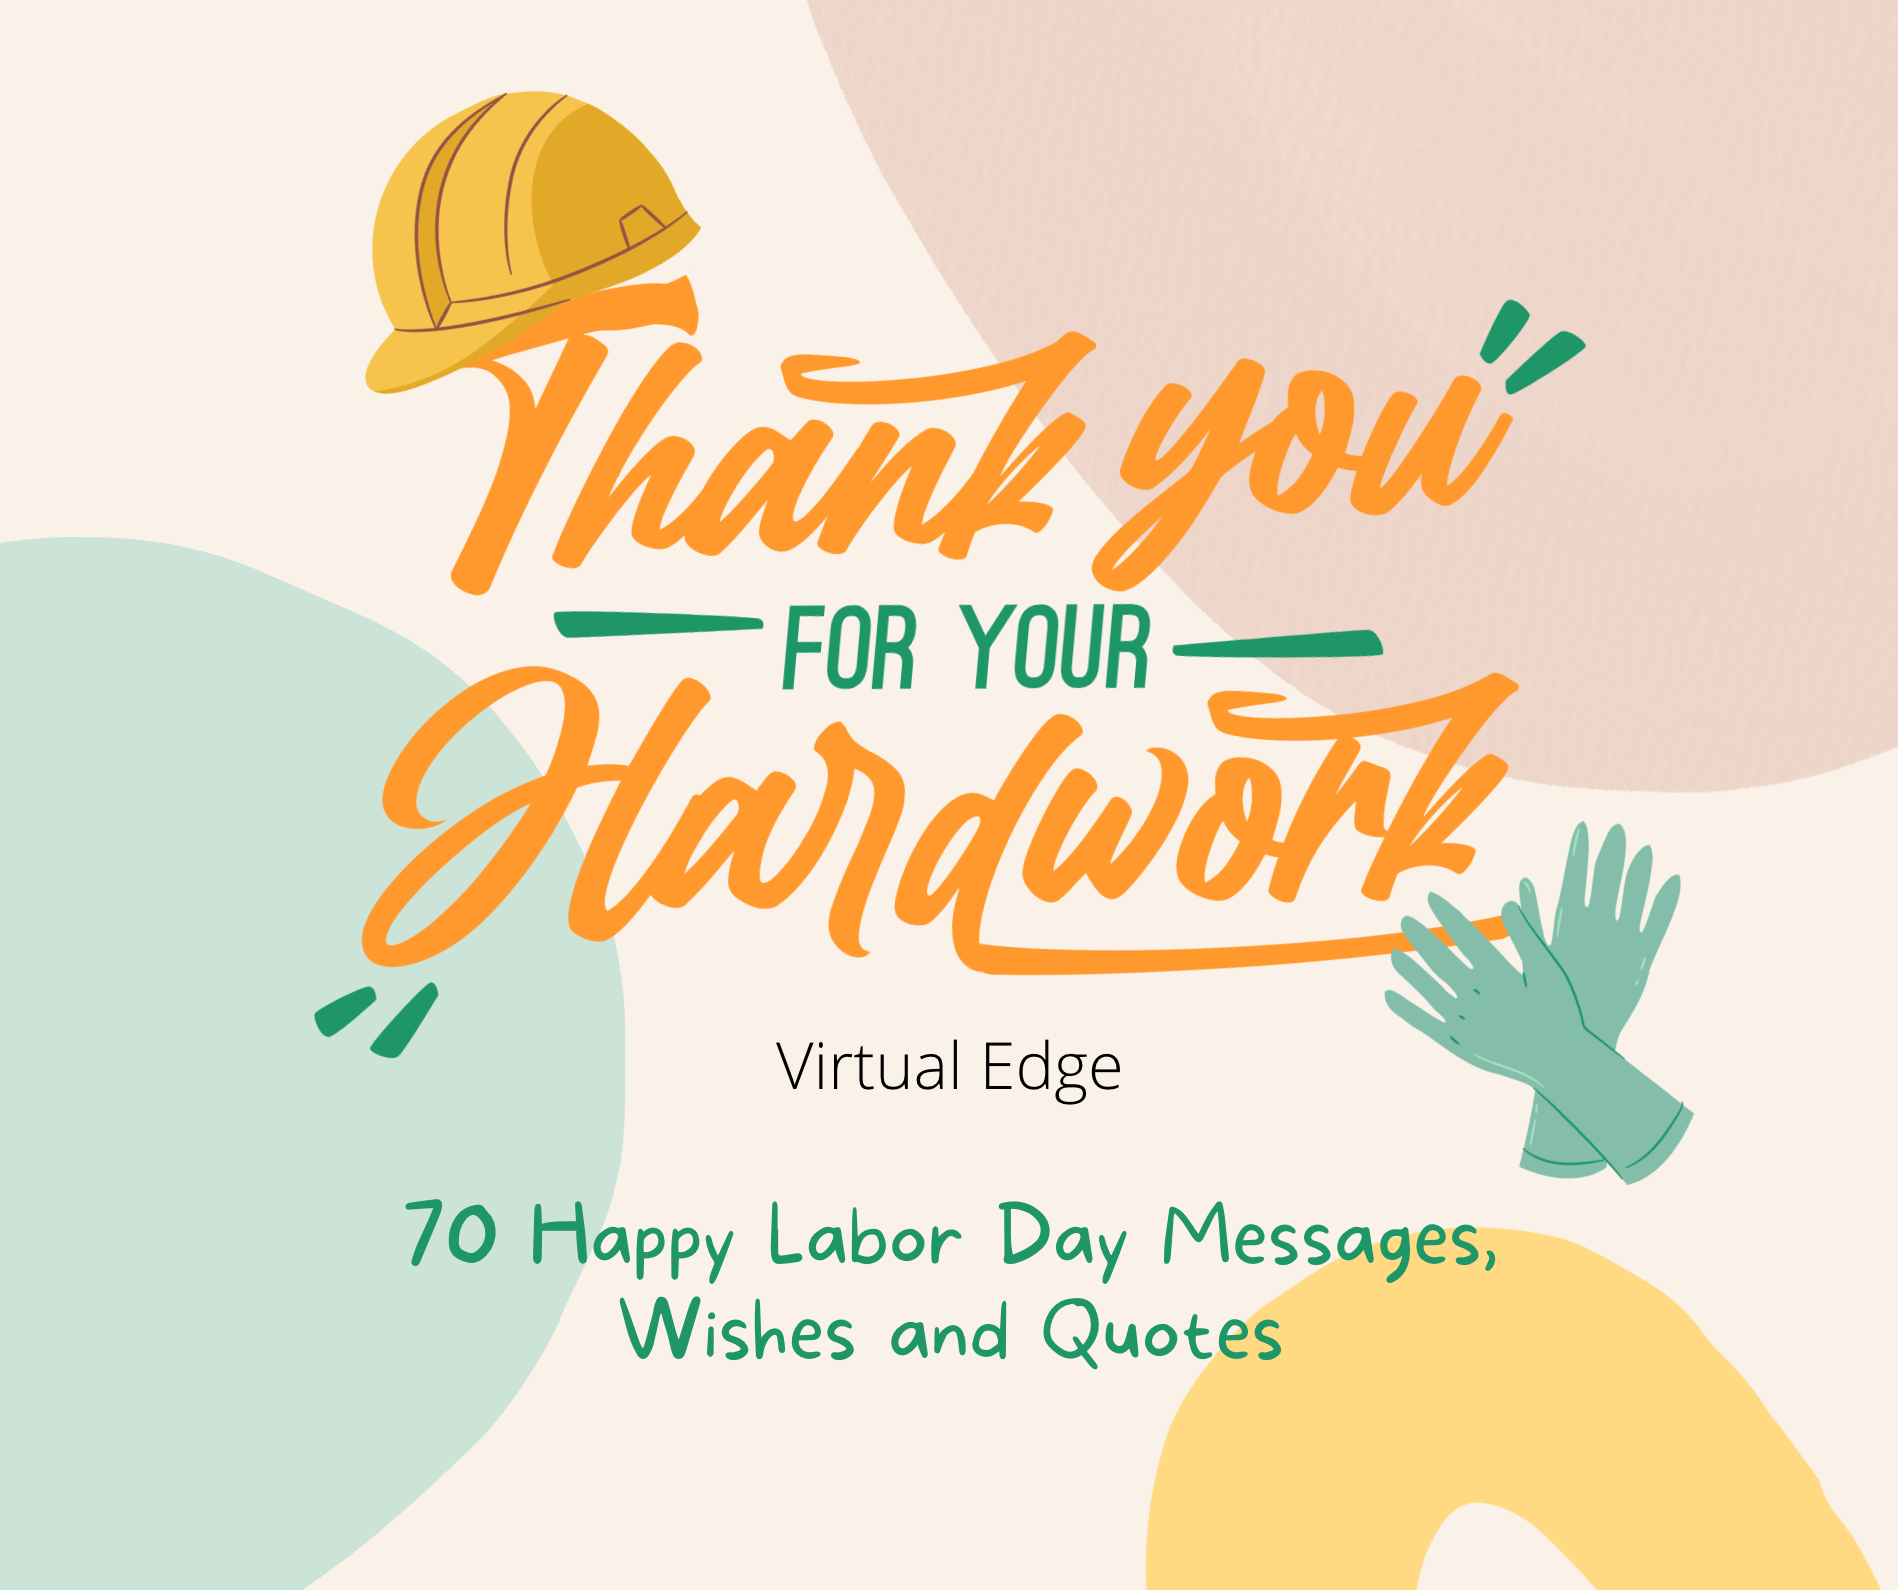 70 Happy Labor Day Messages, Wishes and Quotes